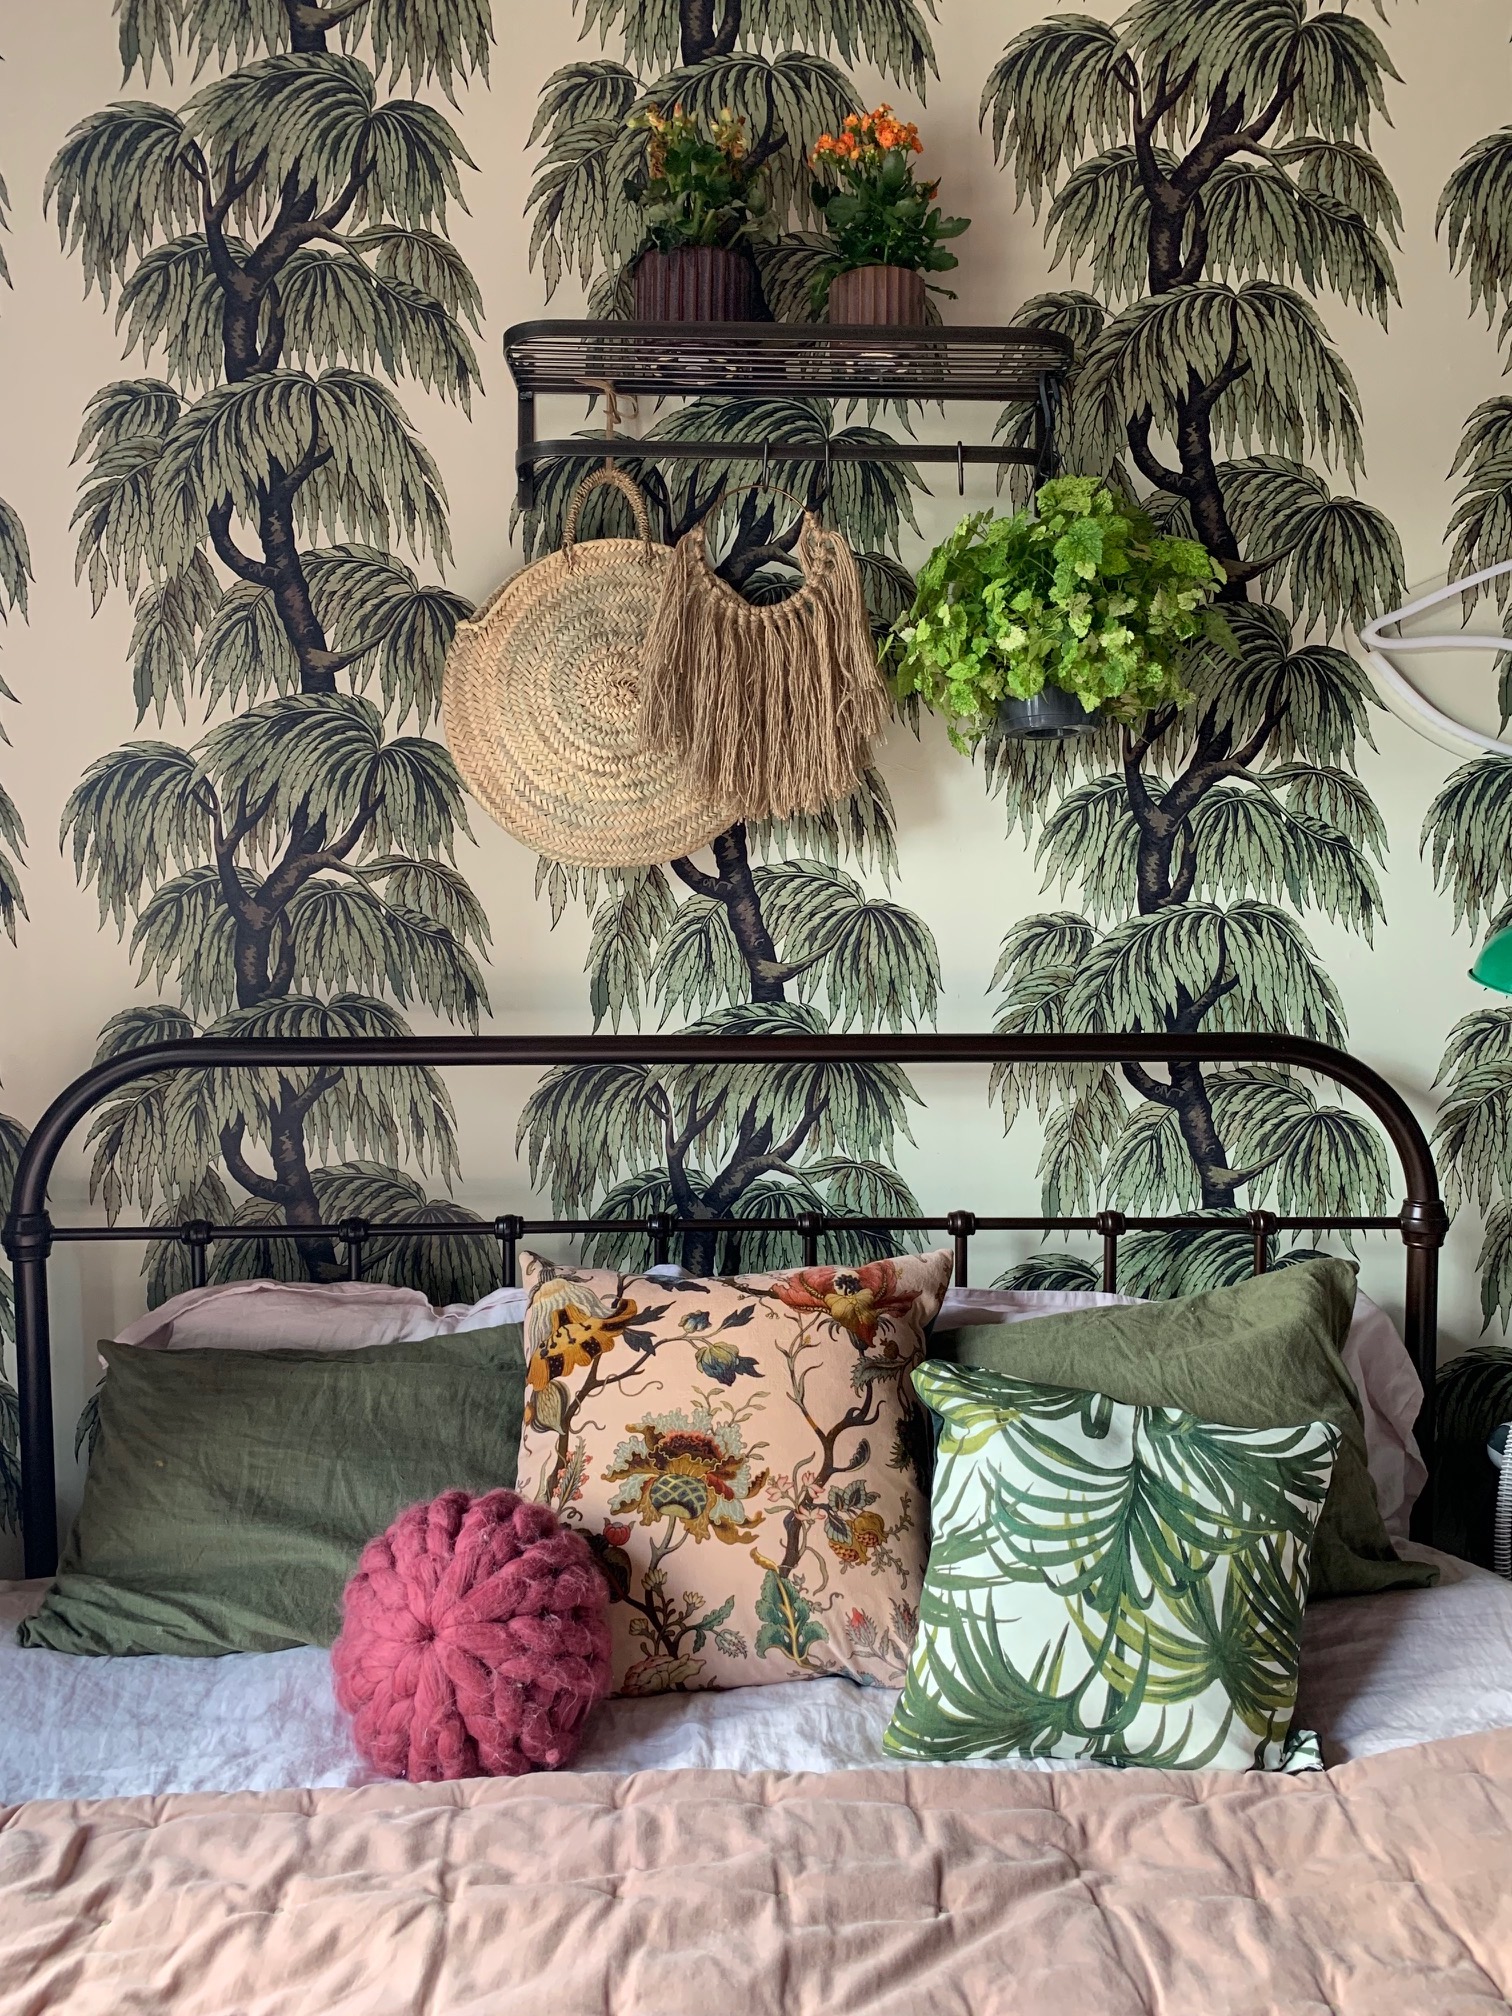 Fifty Shades of Green – the more calming, interiors-based sequel